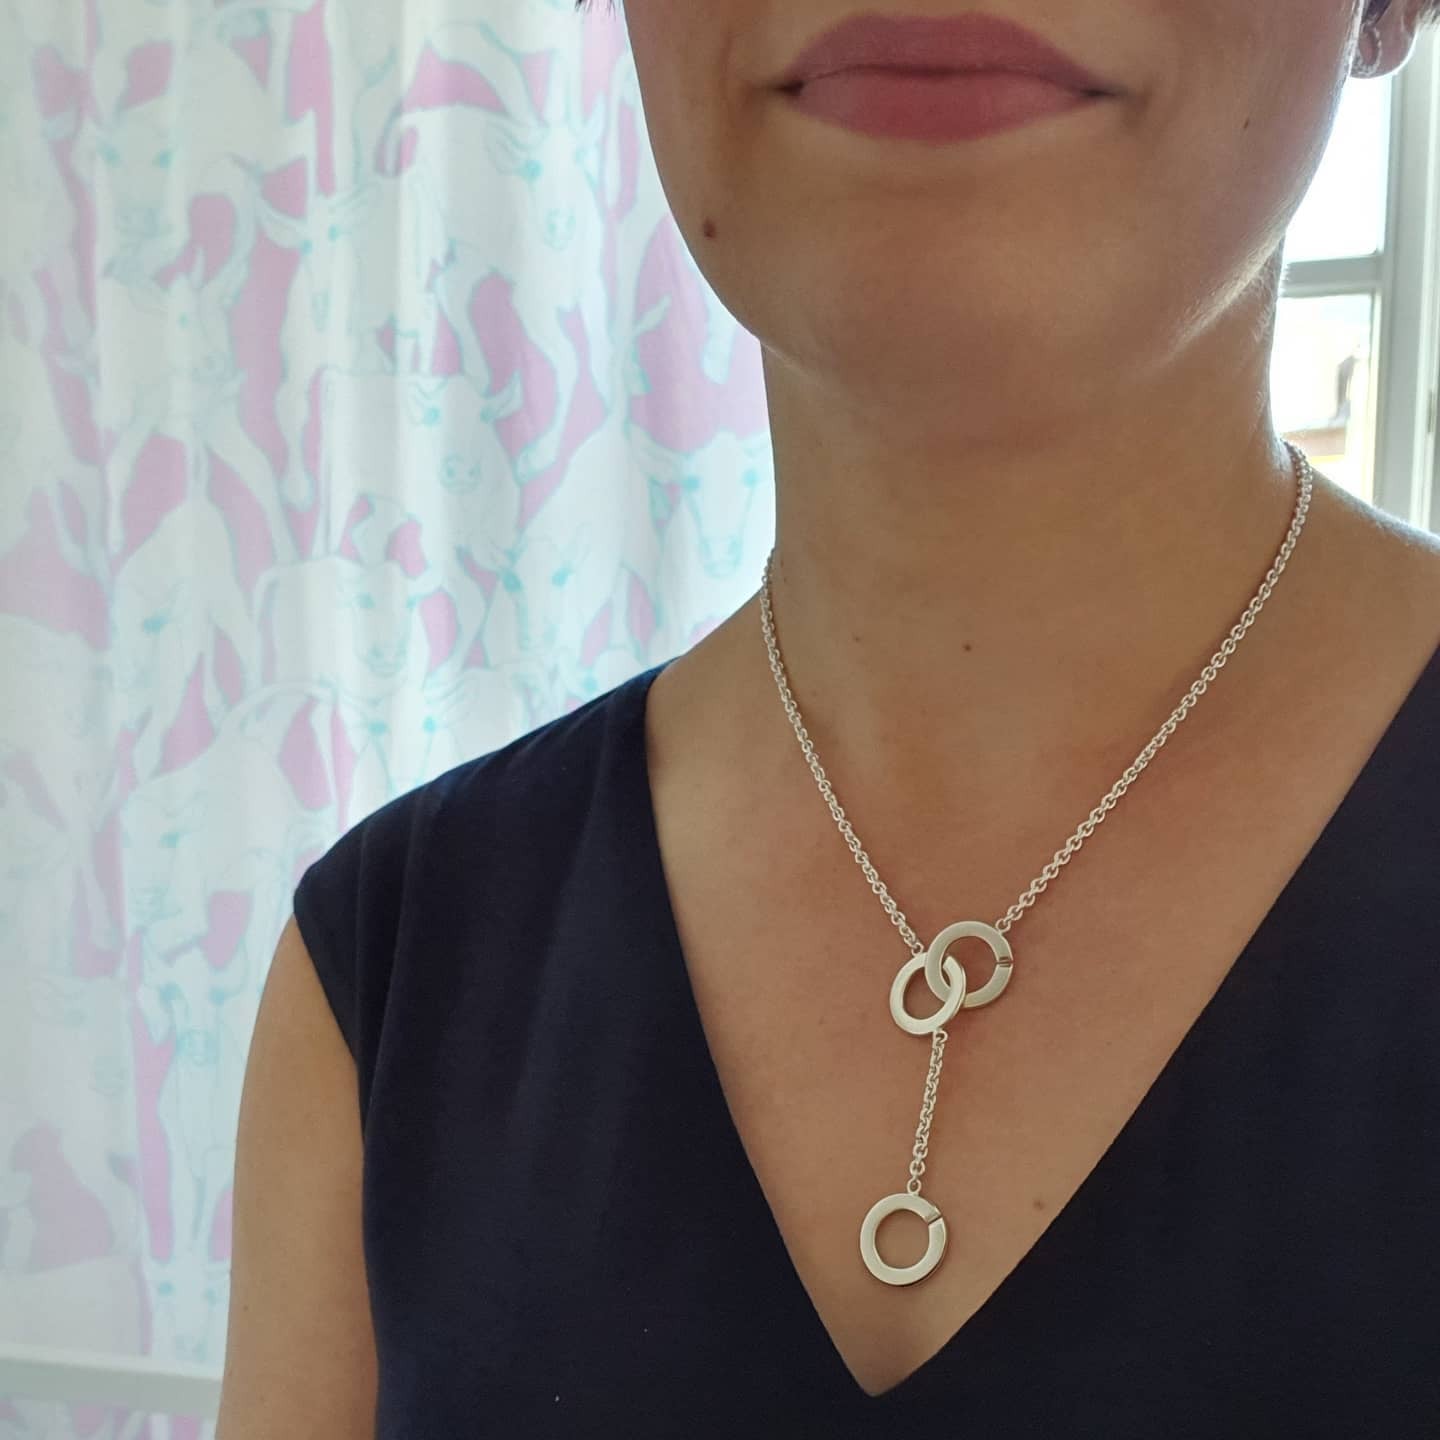 Bubbles necklace, TWO uses